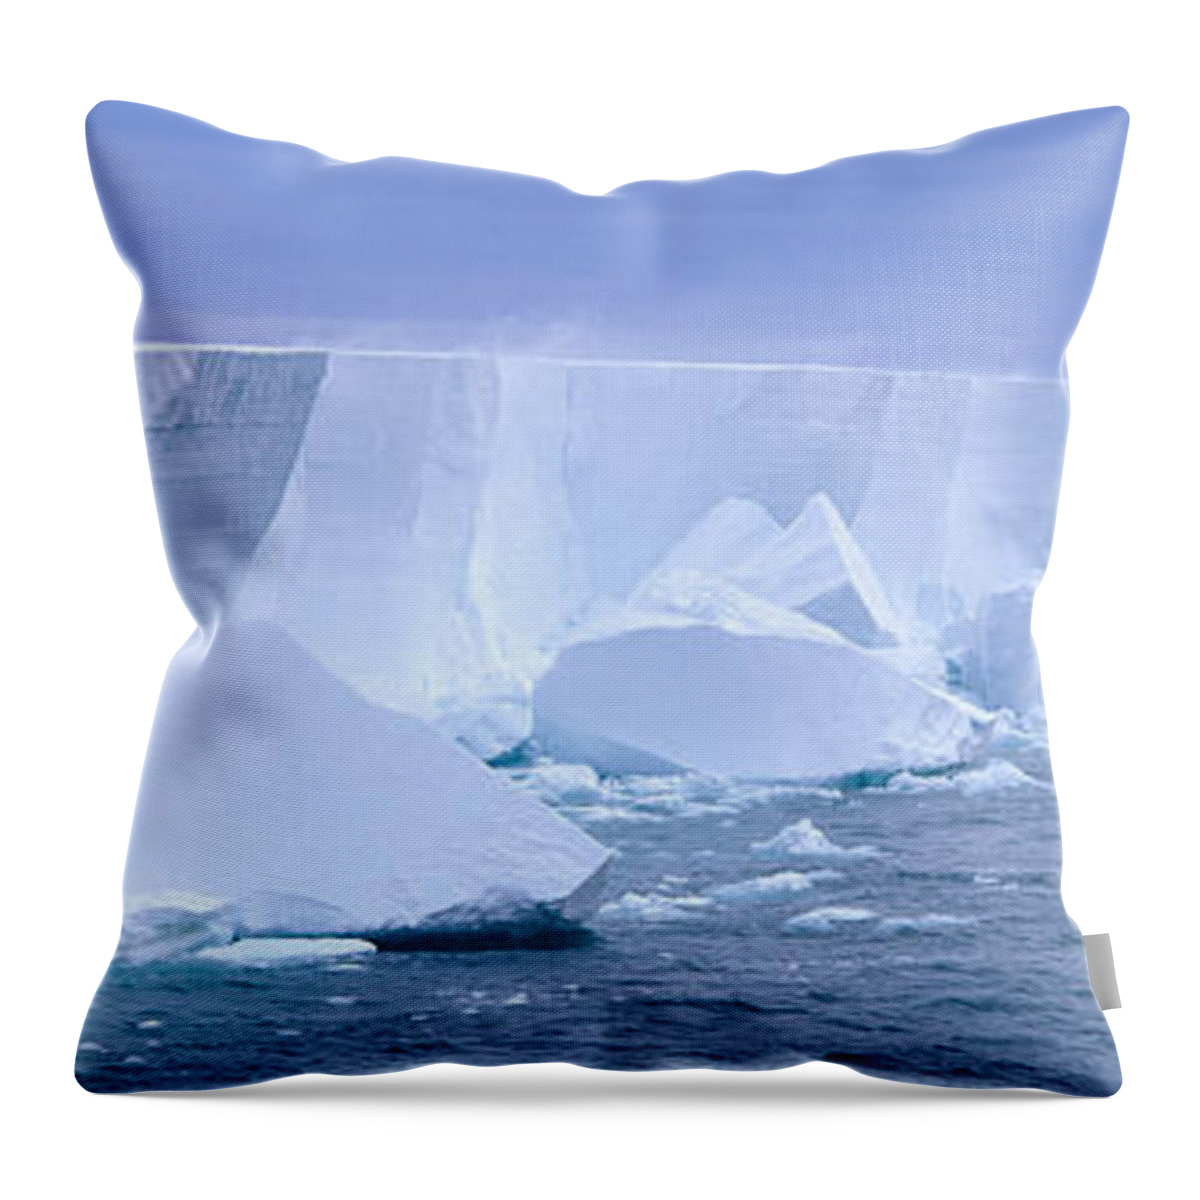 Photography Throw Pillow featuring the photograph Iceberg, Ross Shelf, Antarctica by Panoramic Images